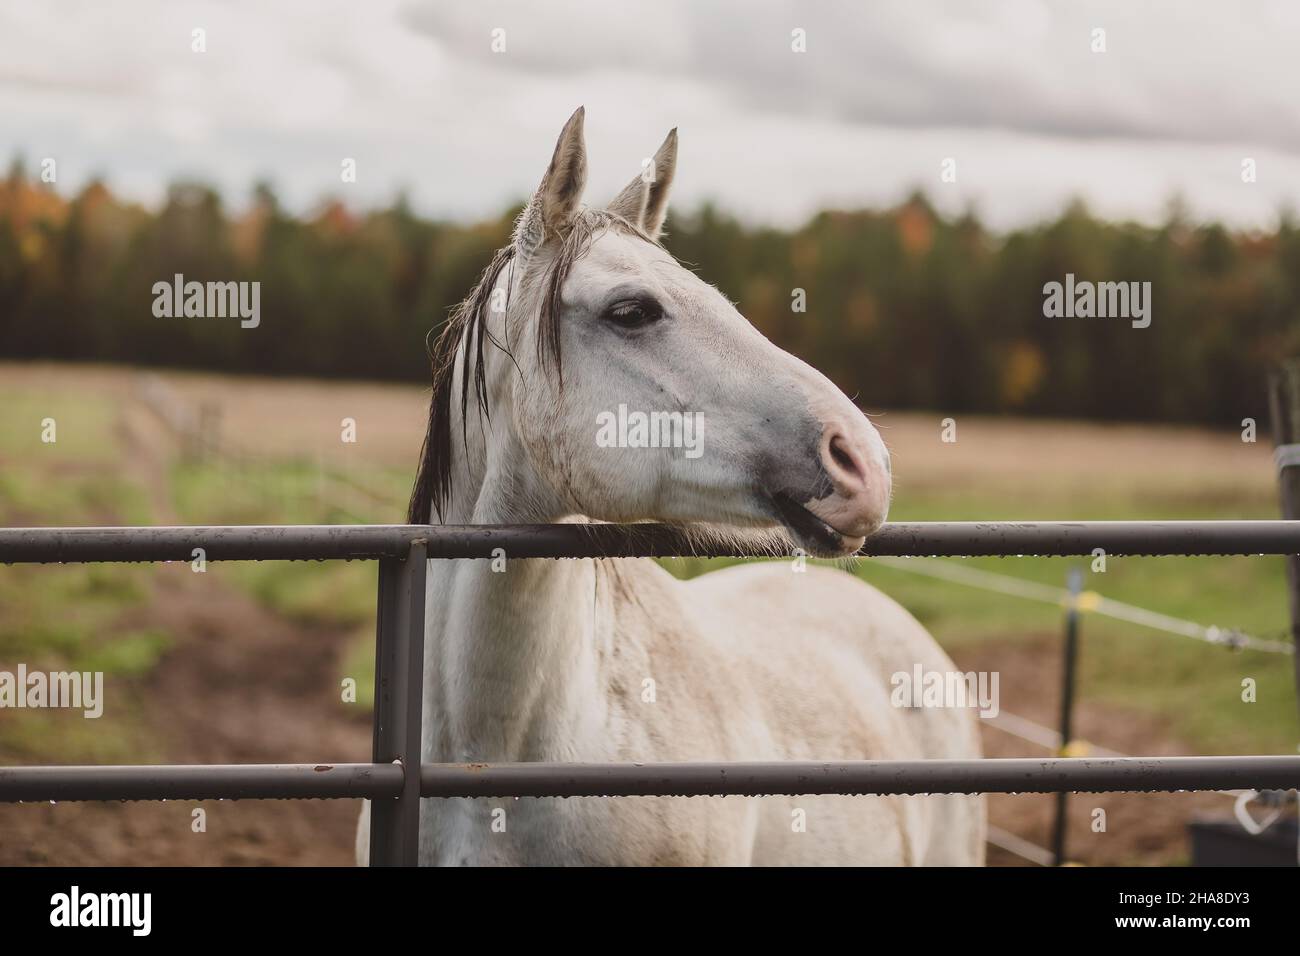 White horse leaning over gate in the fall colors Stock Photo